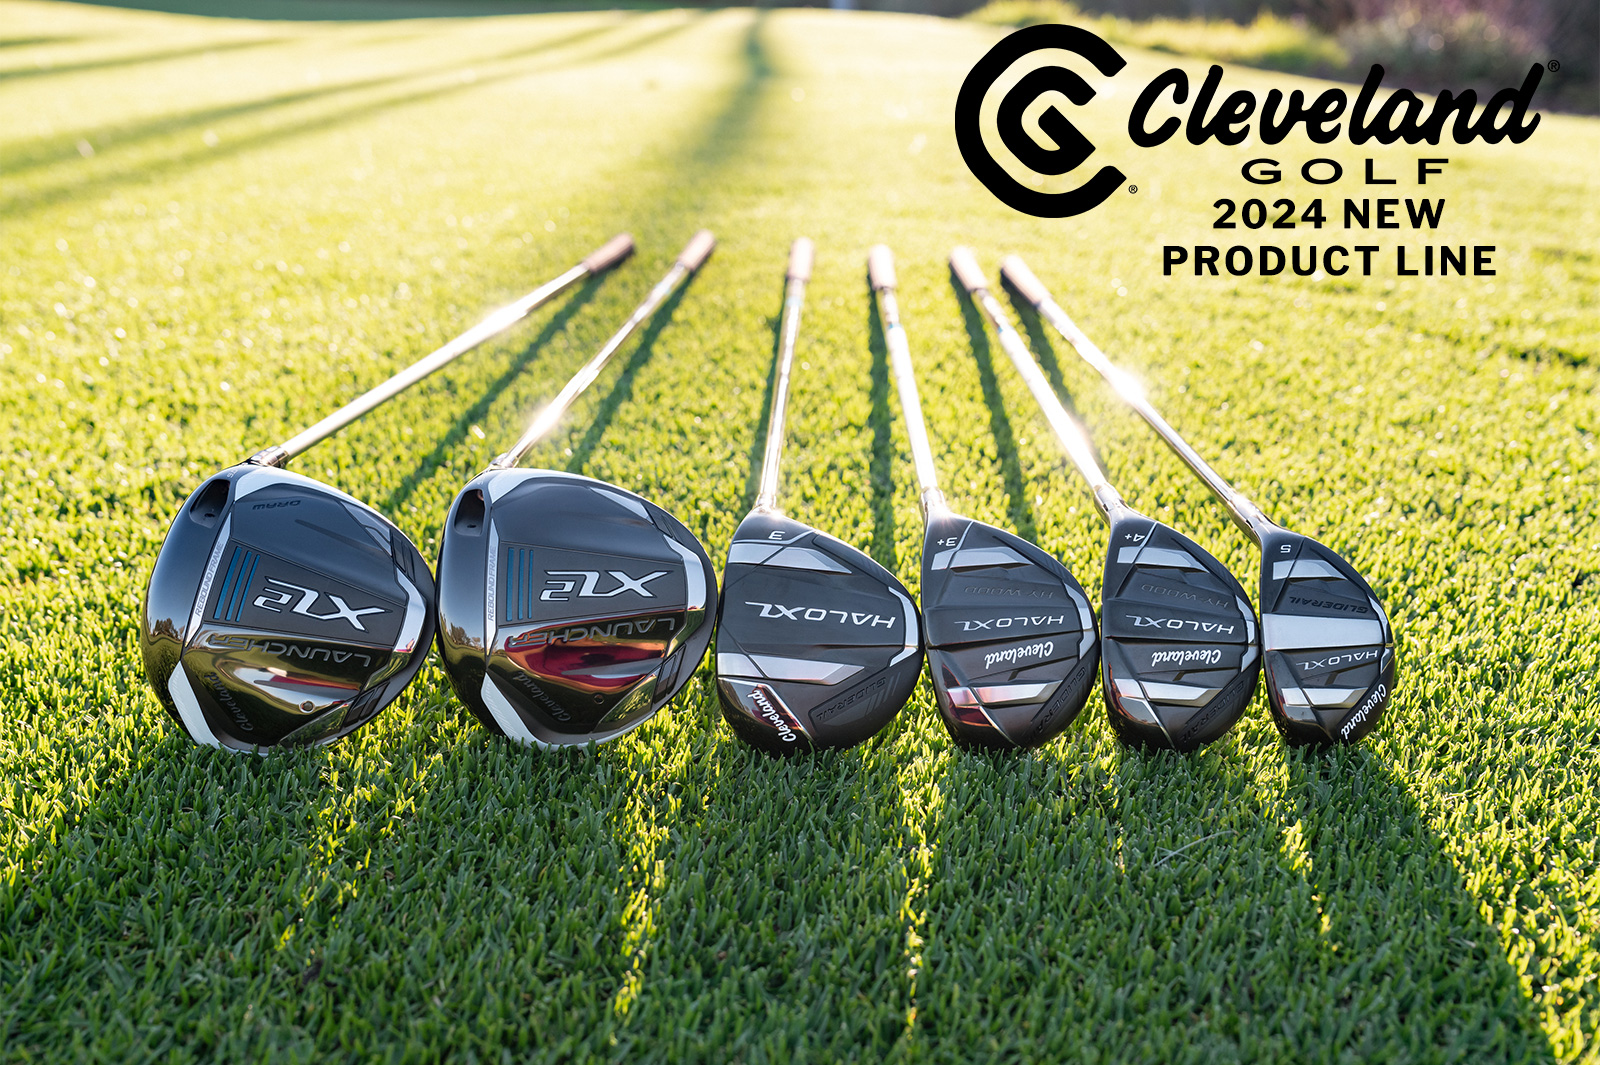 Cleveland Golf 2024 New Product Line